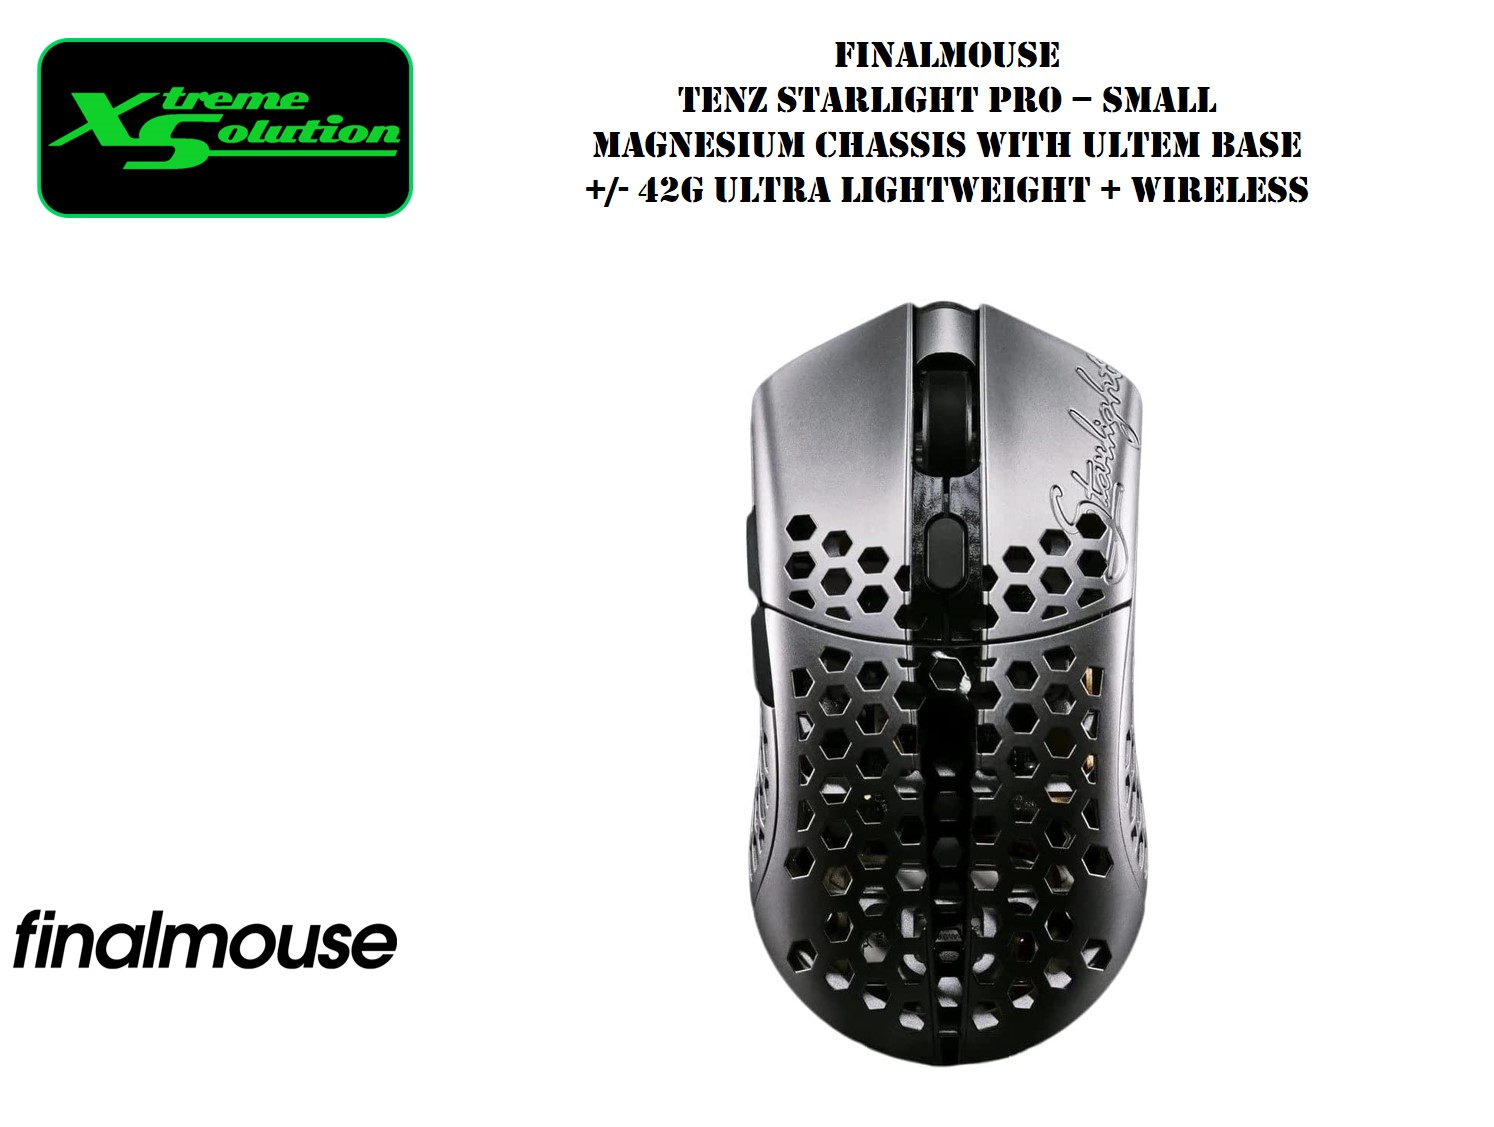 PC/タブレット PC周辺機器 Finalmouse - TenZ Starlight Pro - Small (~42g) & Medium (~47g) - Magnesium  Chassis with Ultem Base - Wireless & Ultra Lightweight